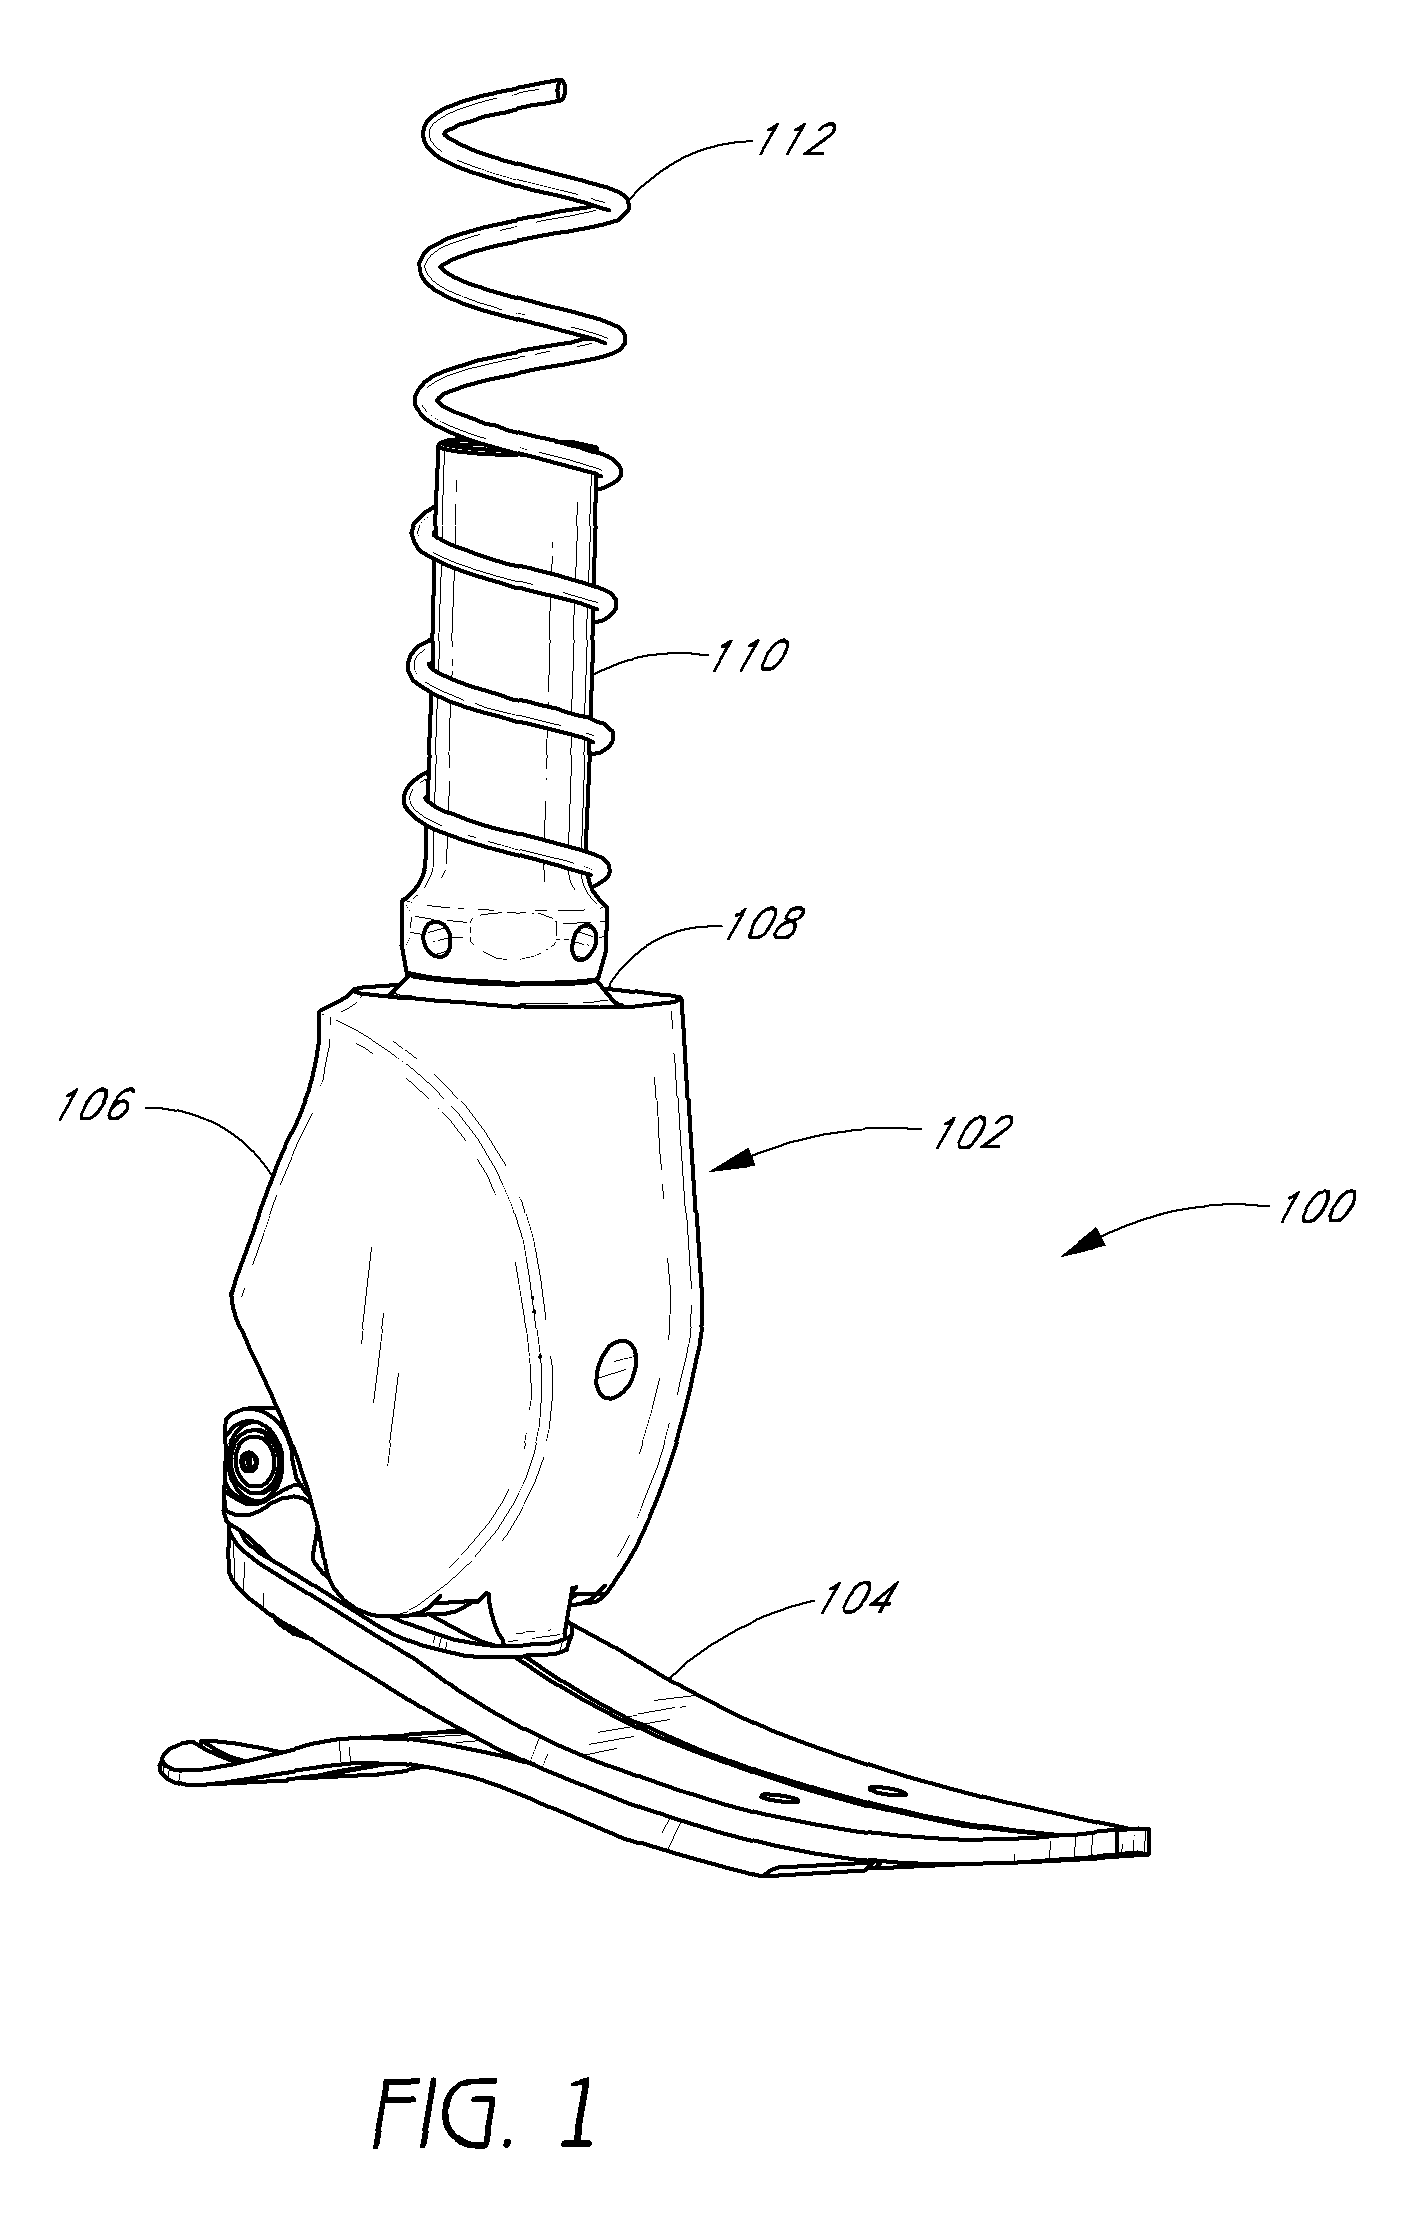 Transfemoral prosthetic systems and methods for operating the same